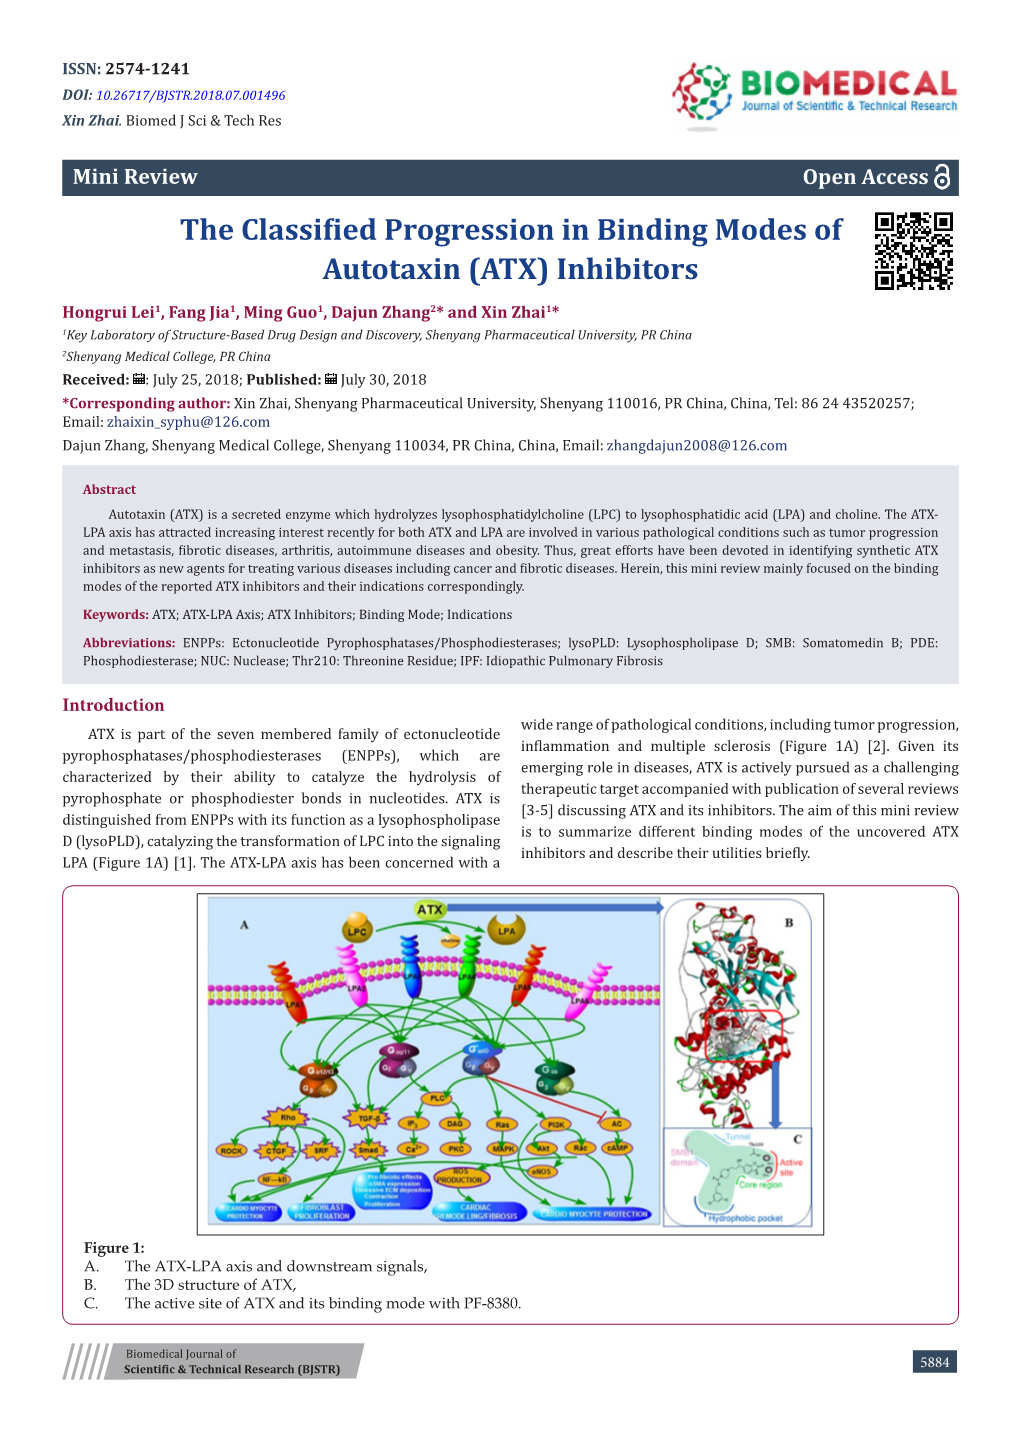 The Classified Progression in Binding Modes of Autotaxin (ATX) Inhibitors